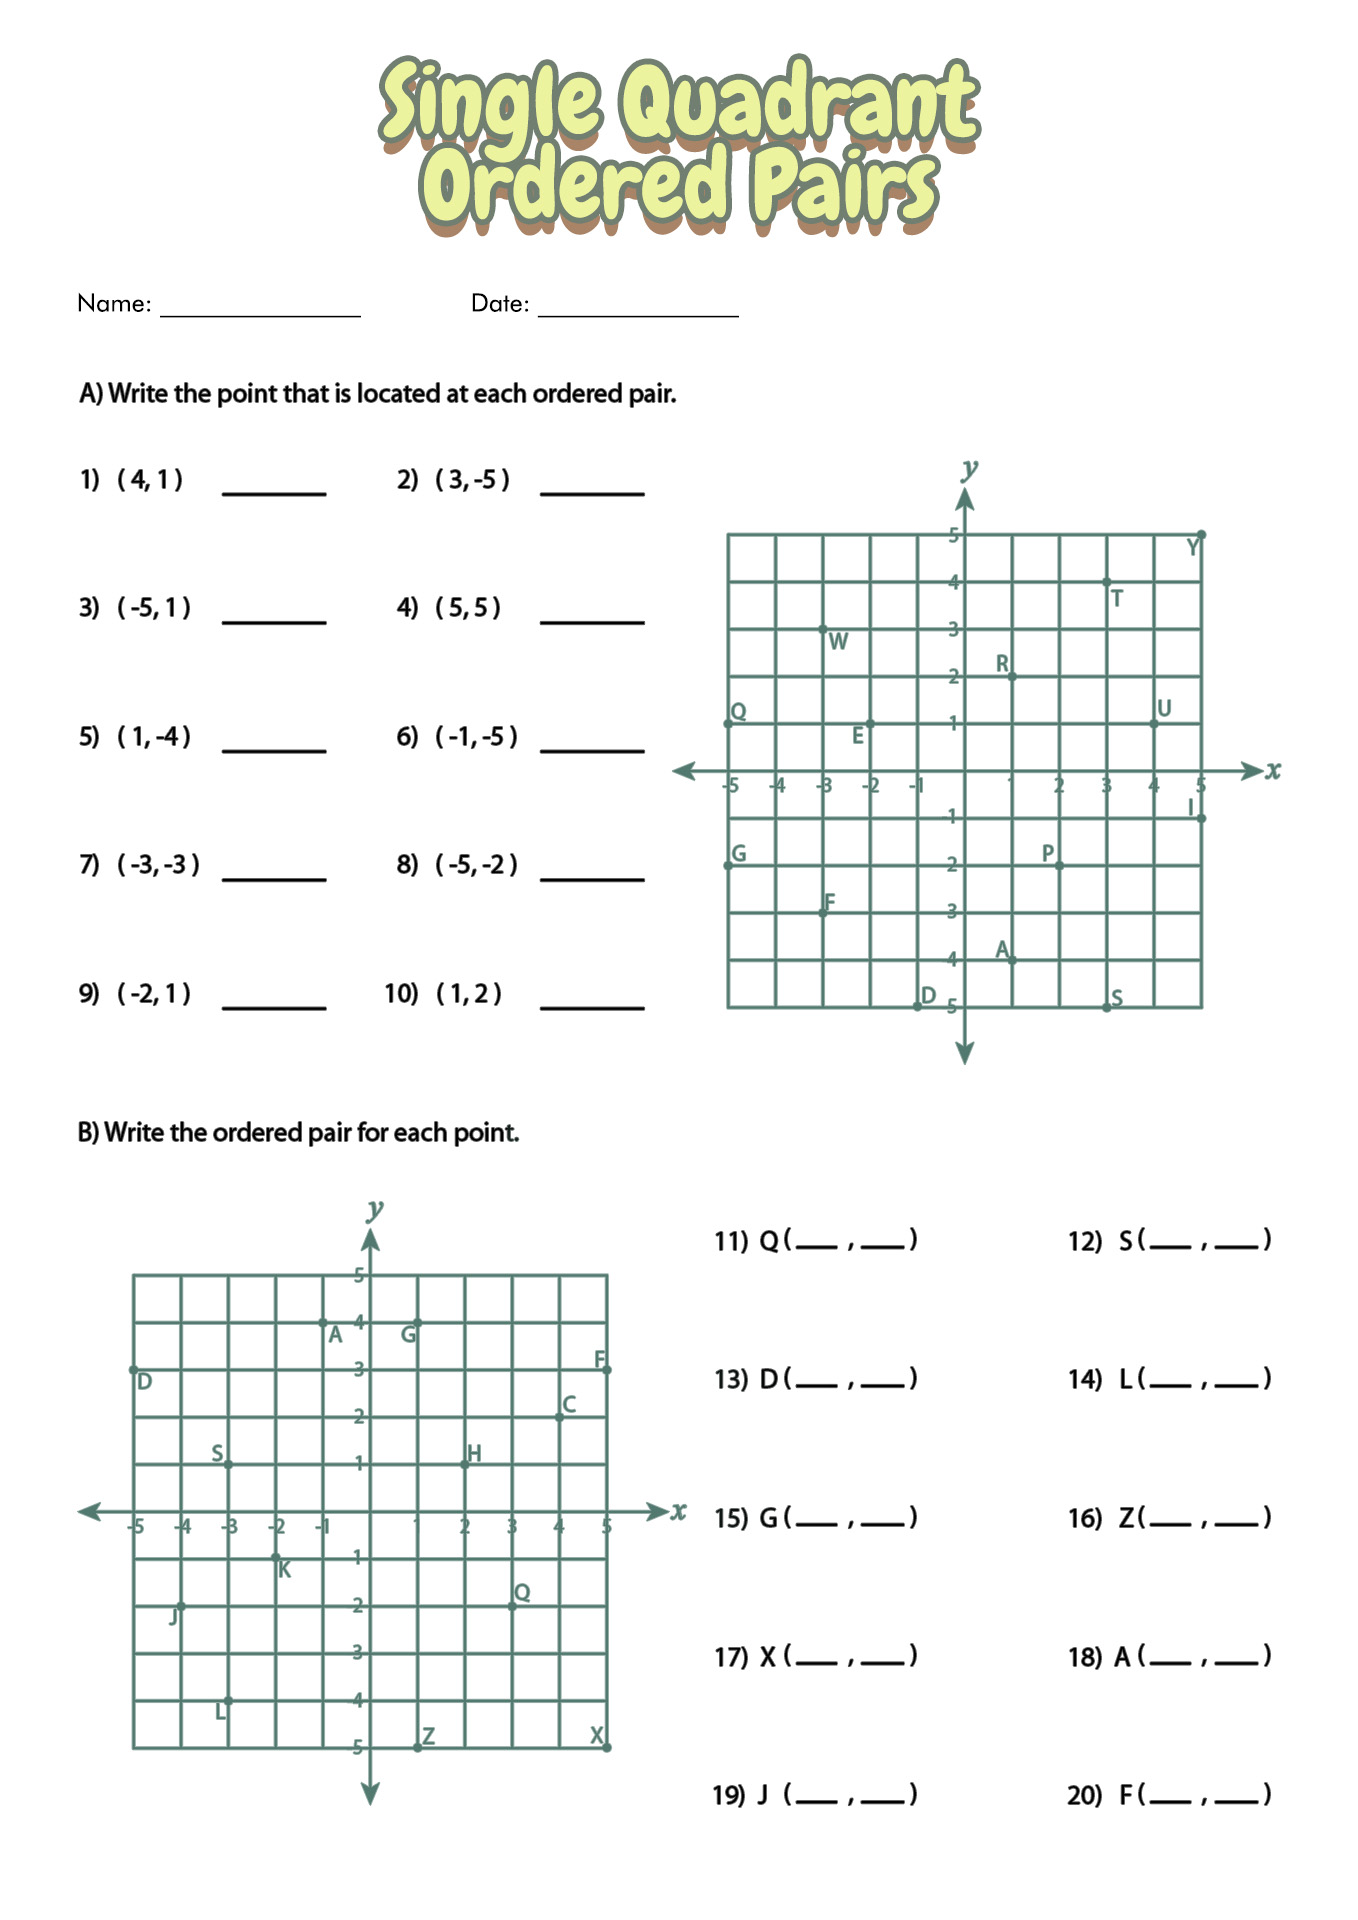 5th Grade Graphing Ordered Pairs Worksheet Image